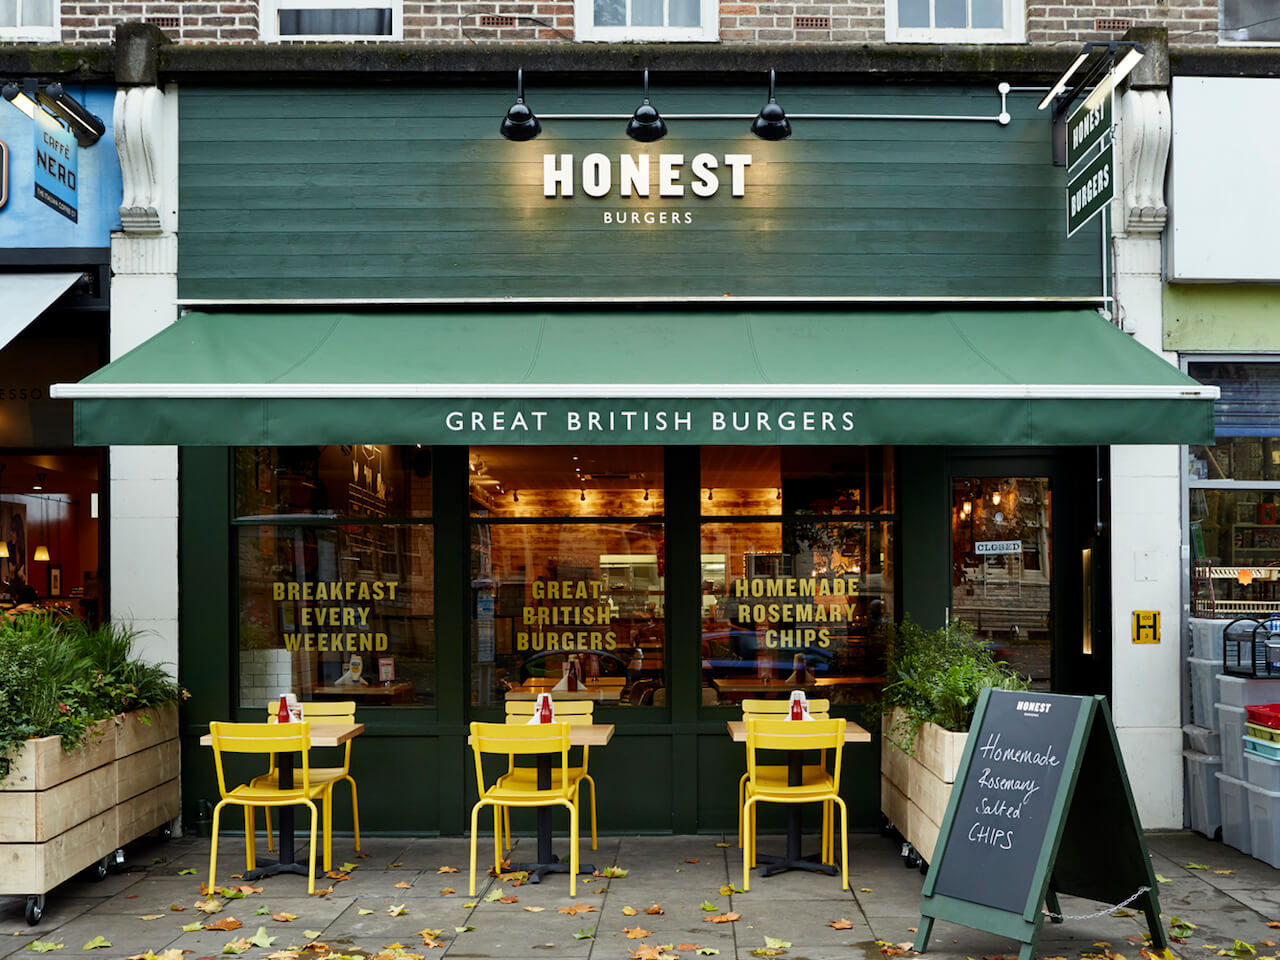 Outside the new Honest Burgers in Ealing with seating